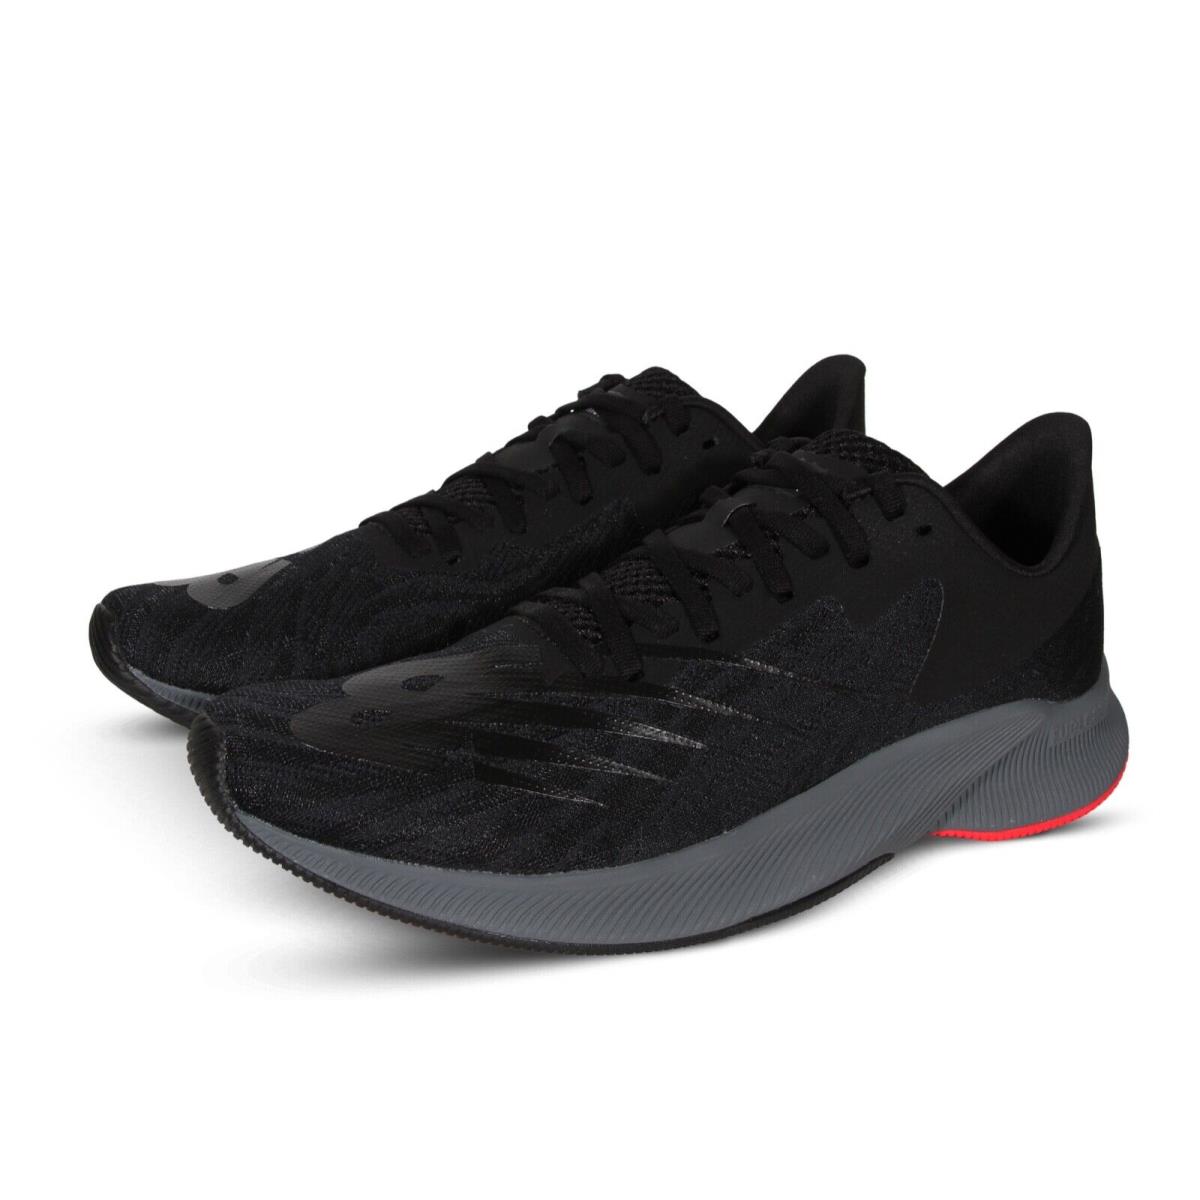 New Balance shoes FuelCell Prism - Black 0